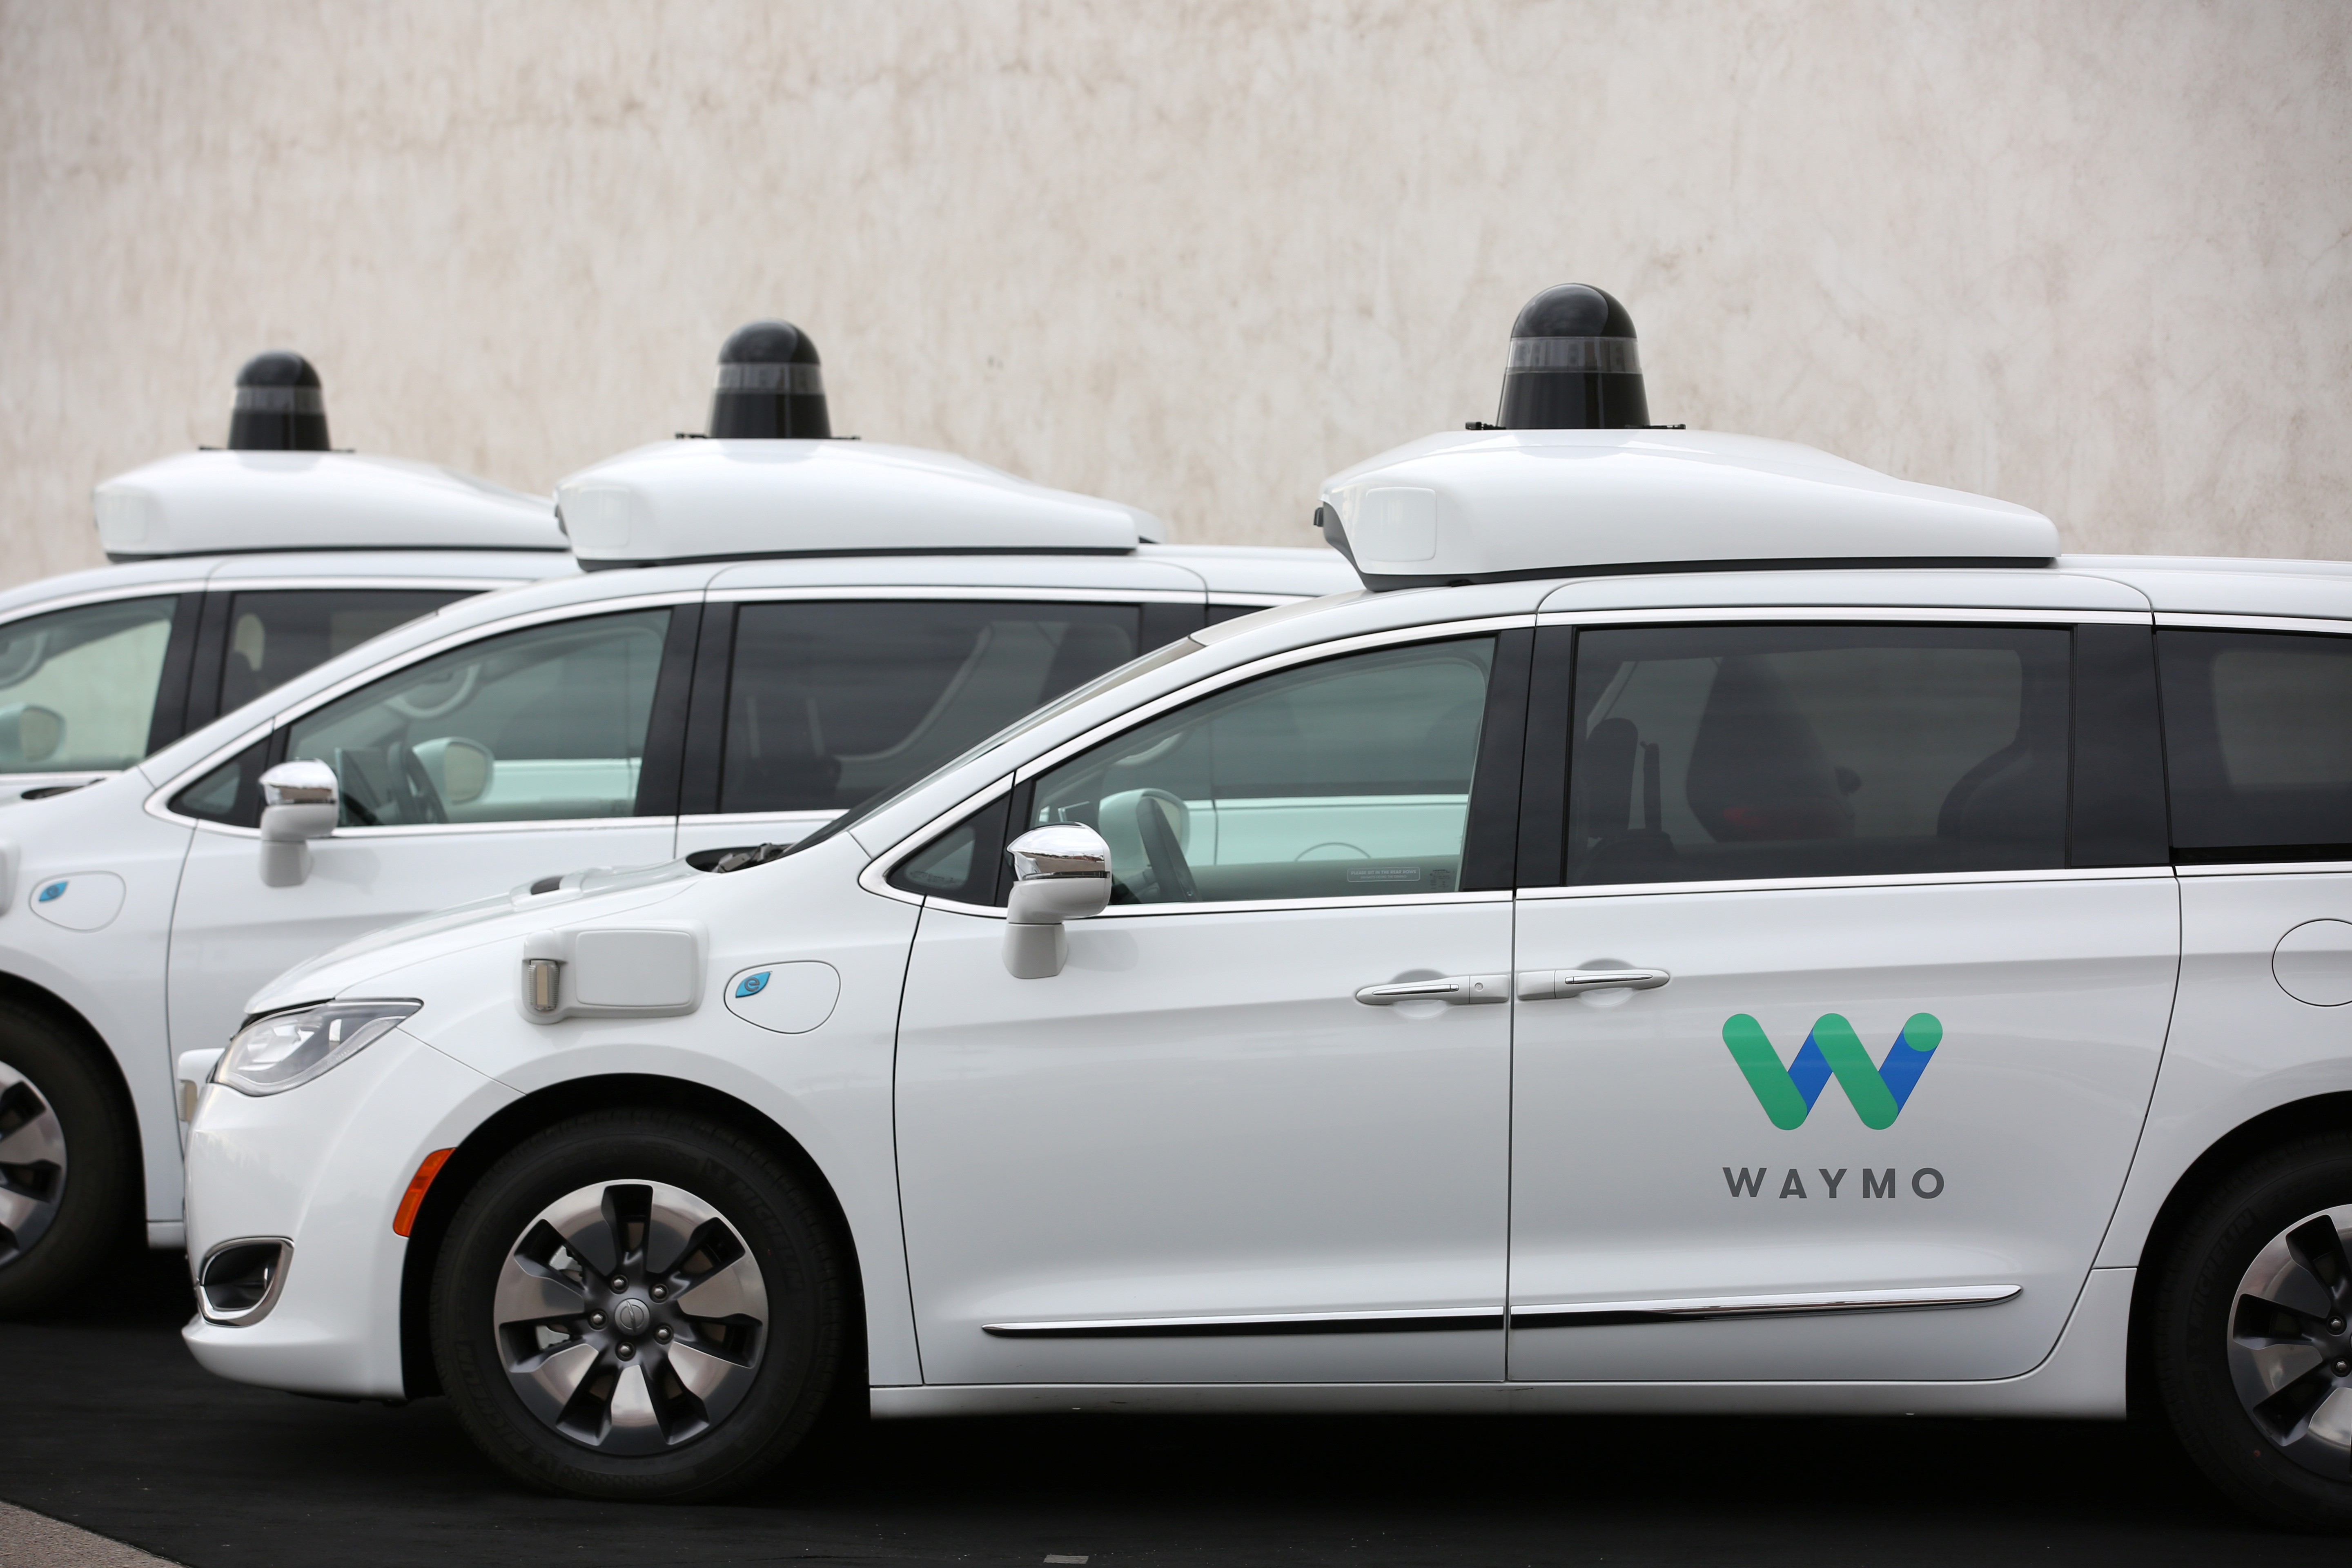 Three of the fleet of 600 Waymo Chrysler Pacifica Hybrid self-driving vehicles are parked and diaplayed during a demonstration in Chandler, Arizona